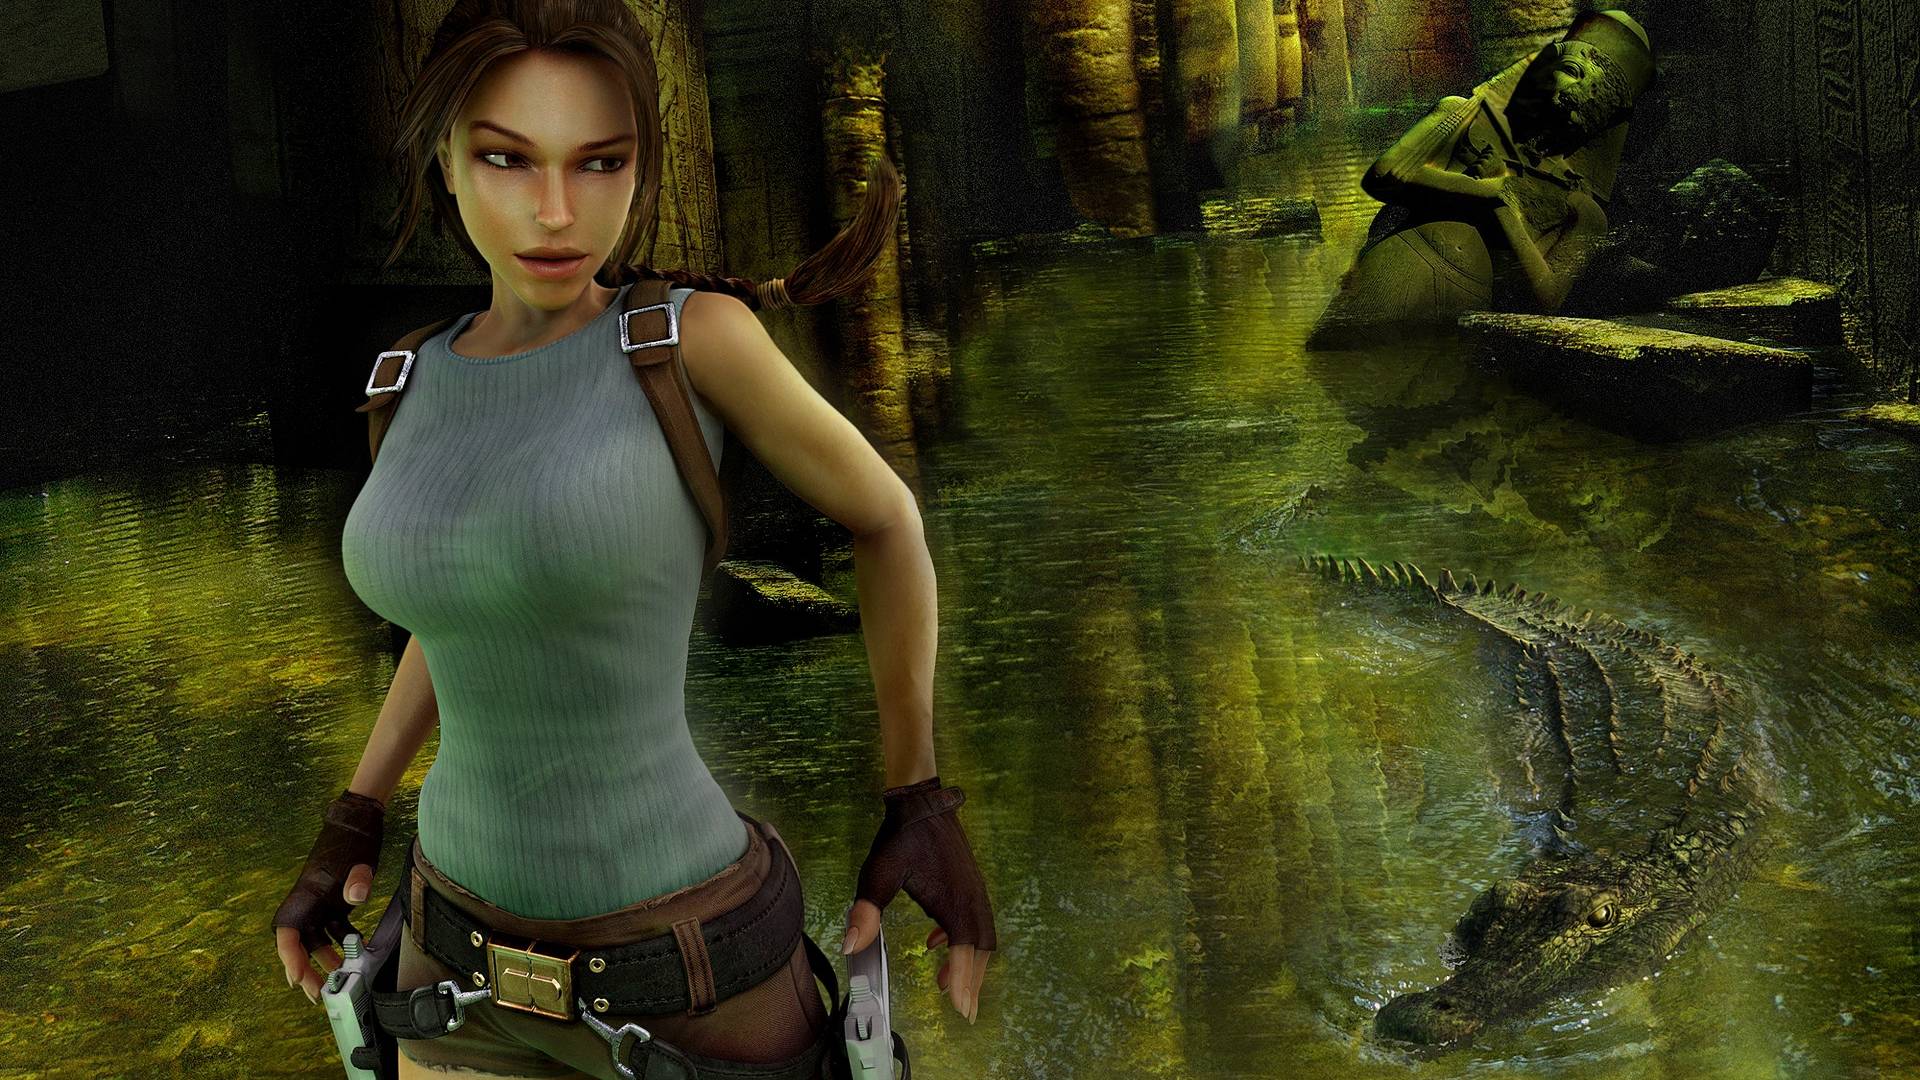 Tomb Raider Wallpaper LOLd Wallpaper   Funny Pictures   Funny